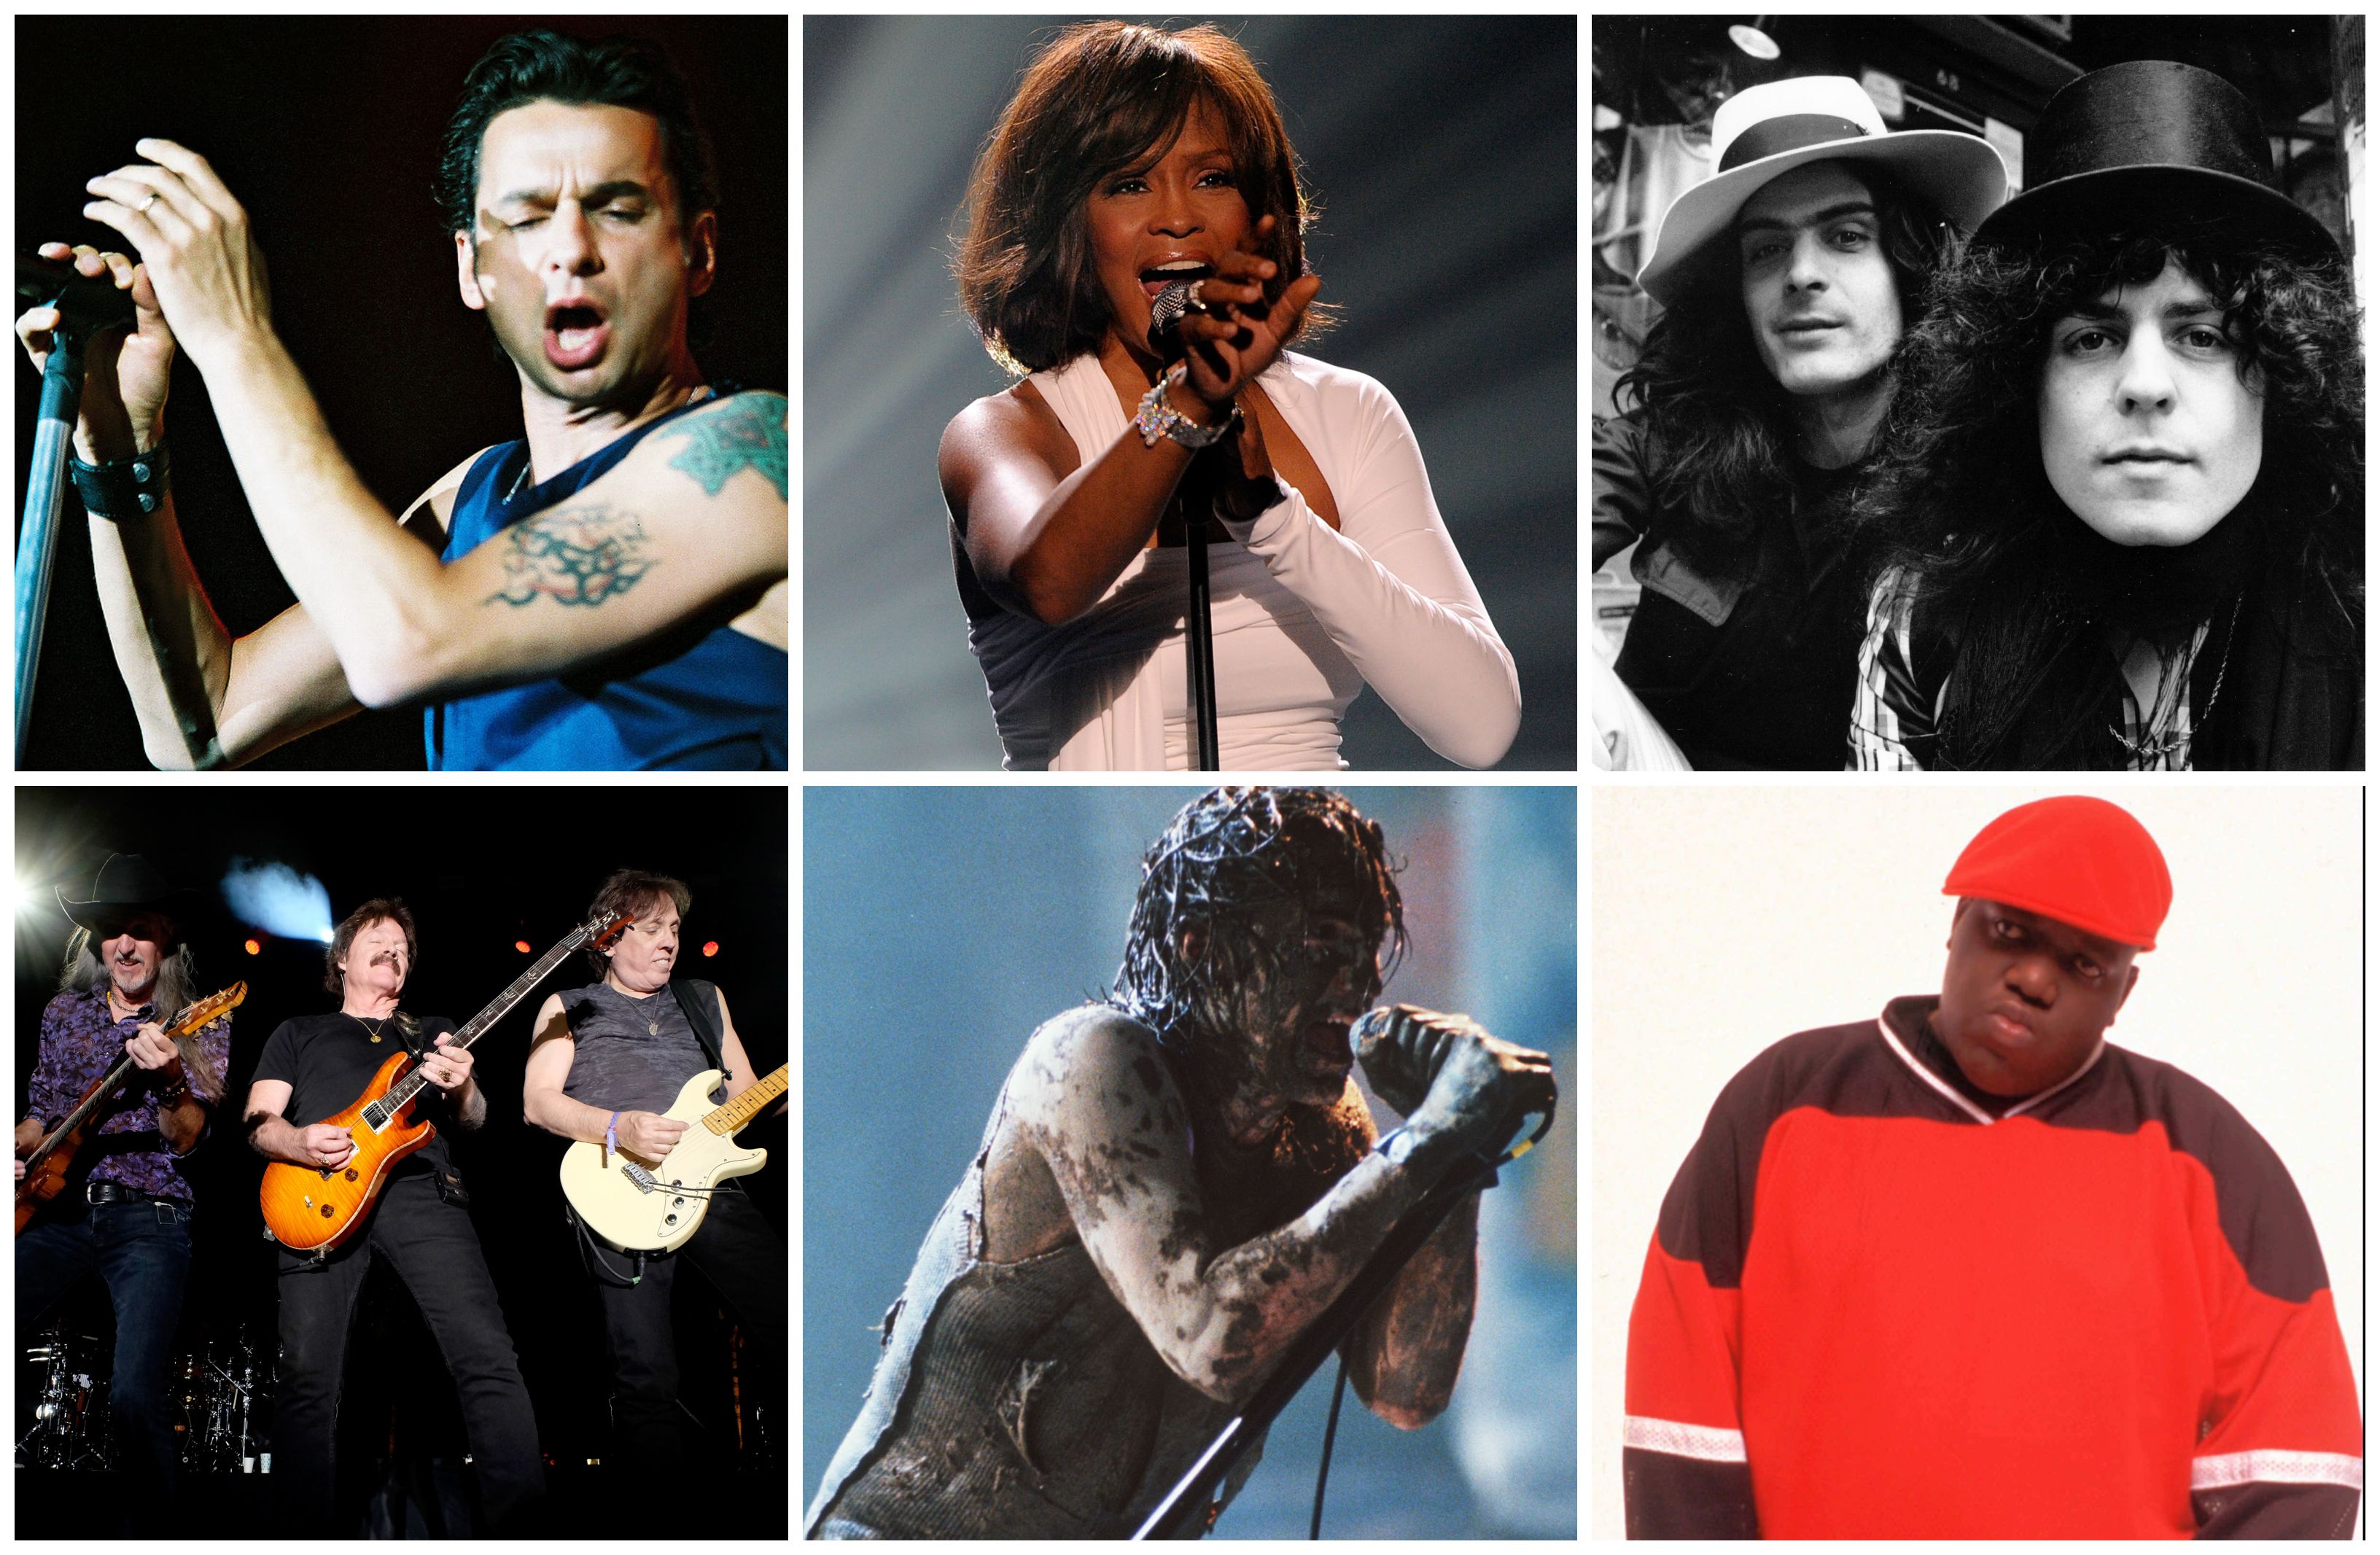 The Rock and Roll Hall of Fame announces its 2020 inductees: Depeche Mode, Nine Inch Nails, Doobie Brothers, T-Rex, Whitney Houston, and Notorious B.I.G. (RIP)